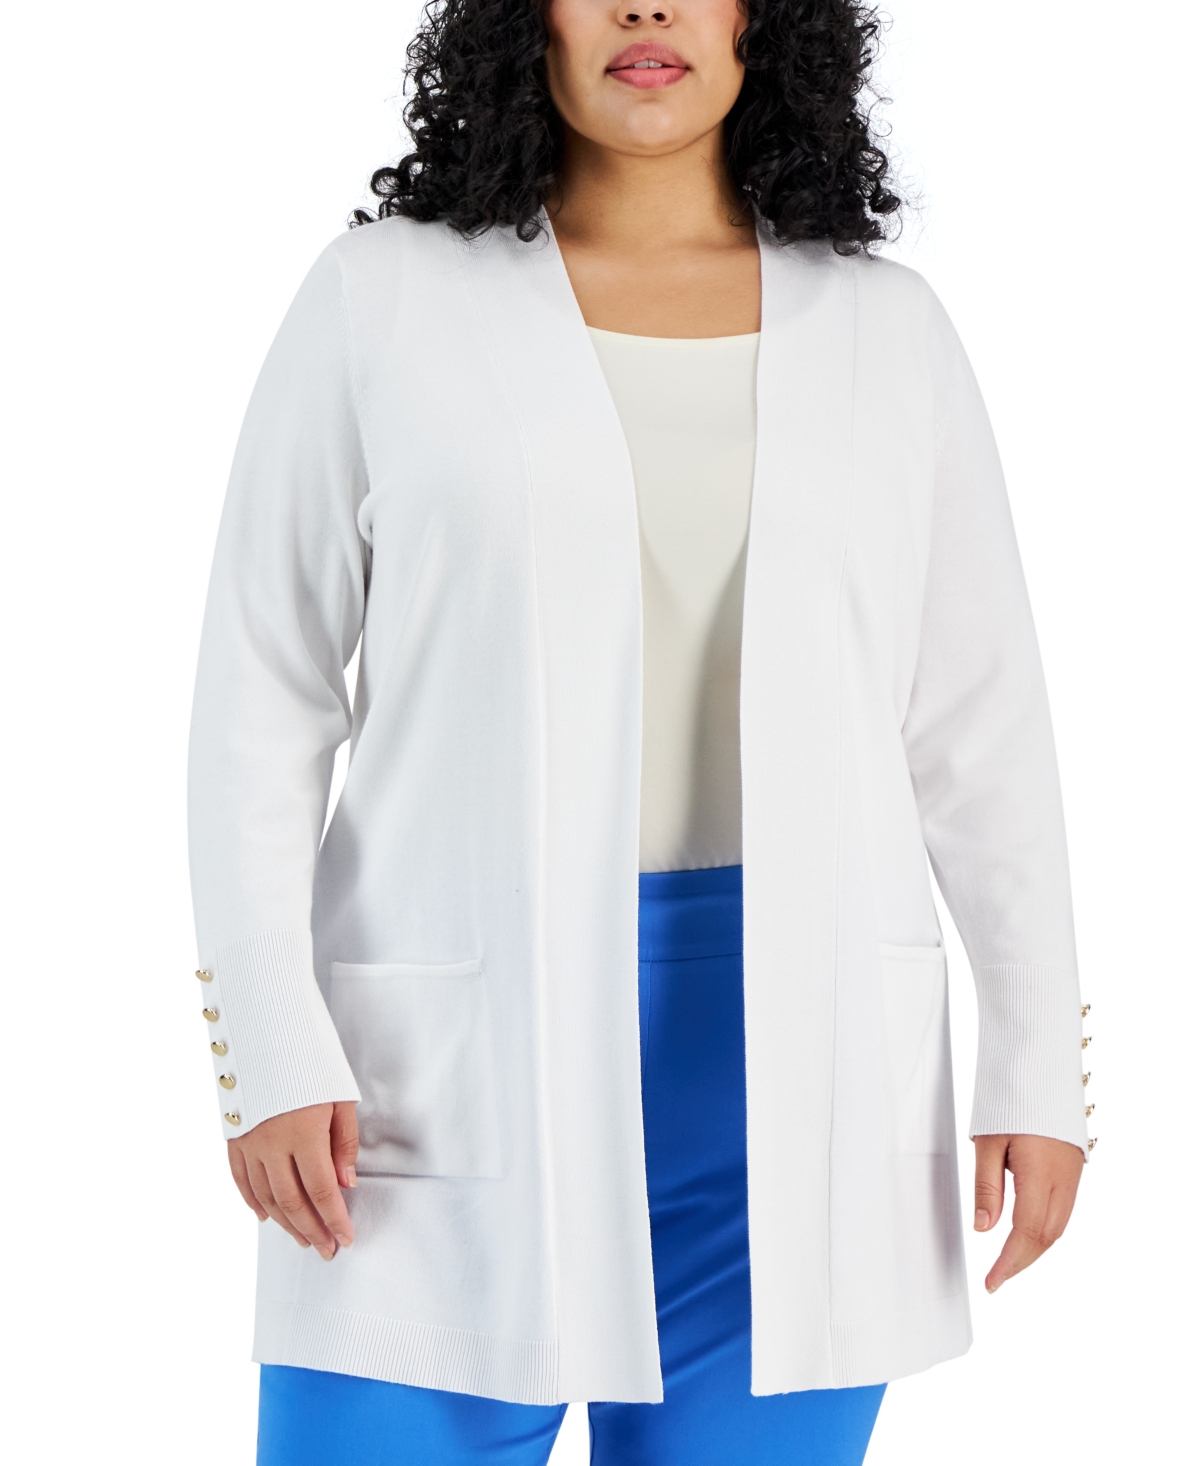 Jm Collection Plus Size Open-Front Long-Sleeve Cardigan, Created for Macy's